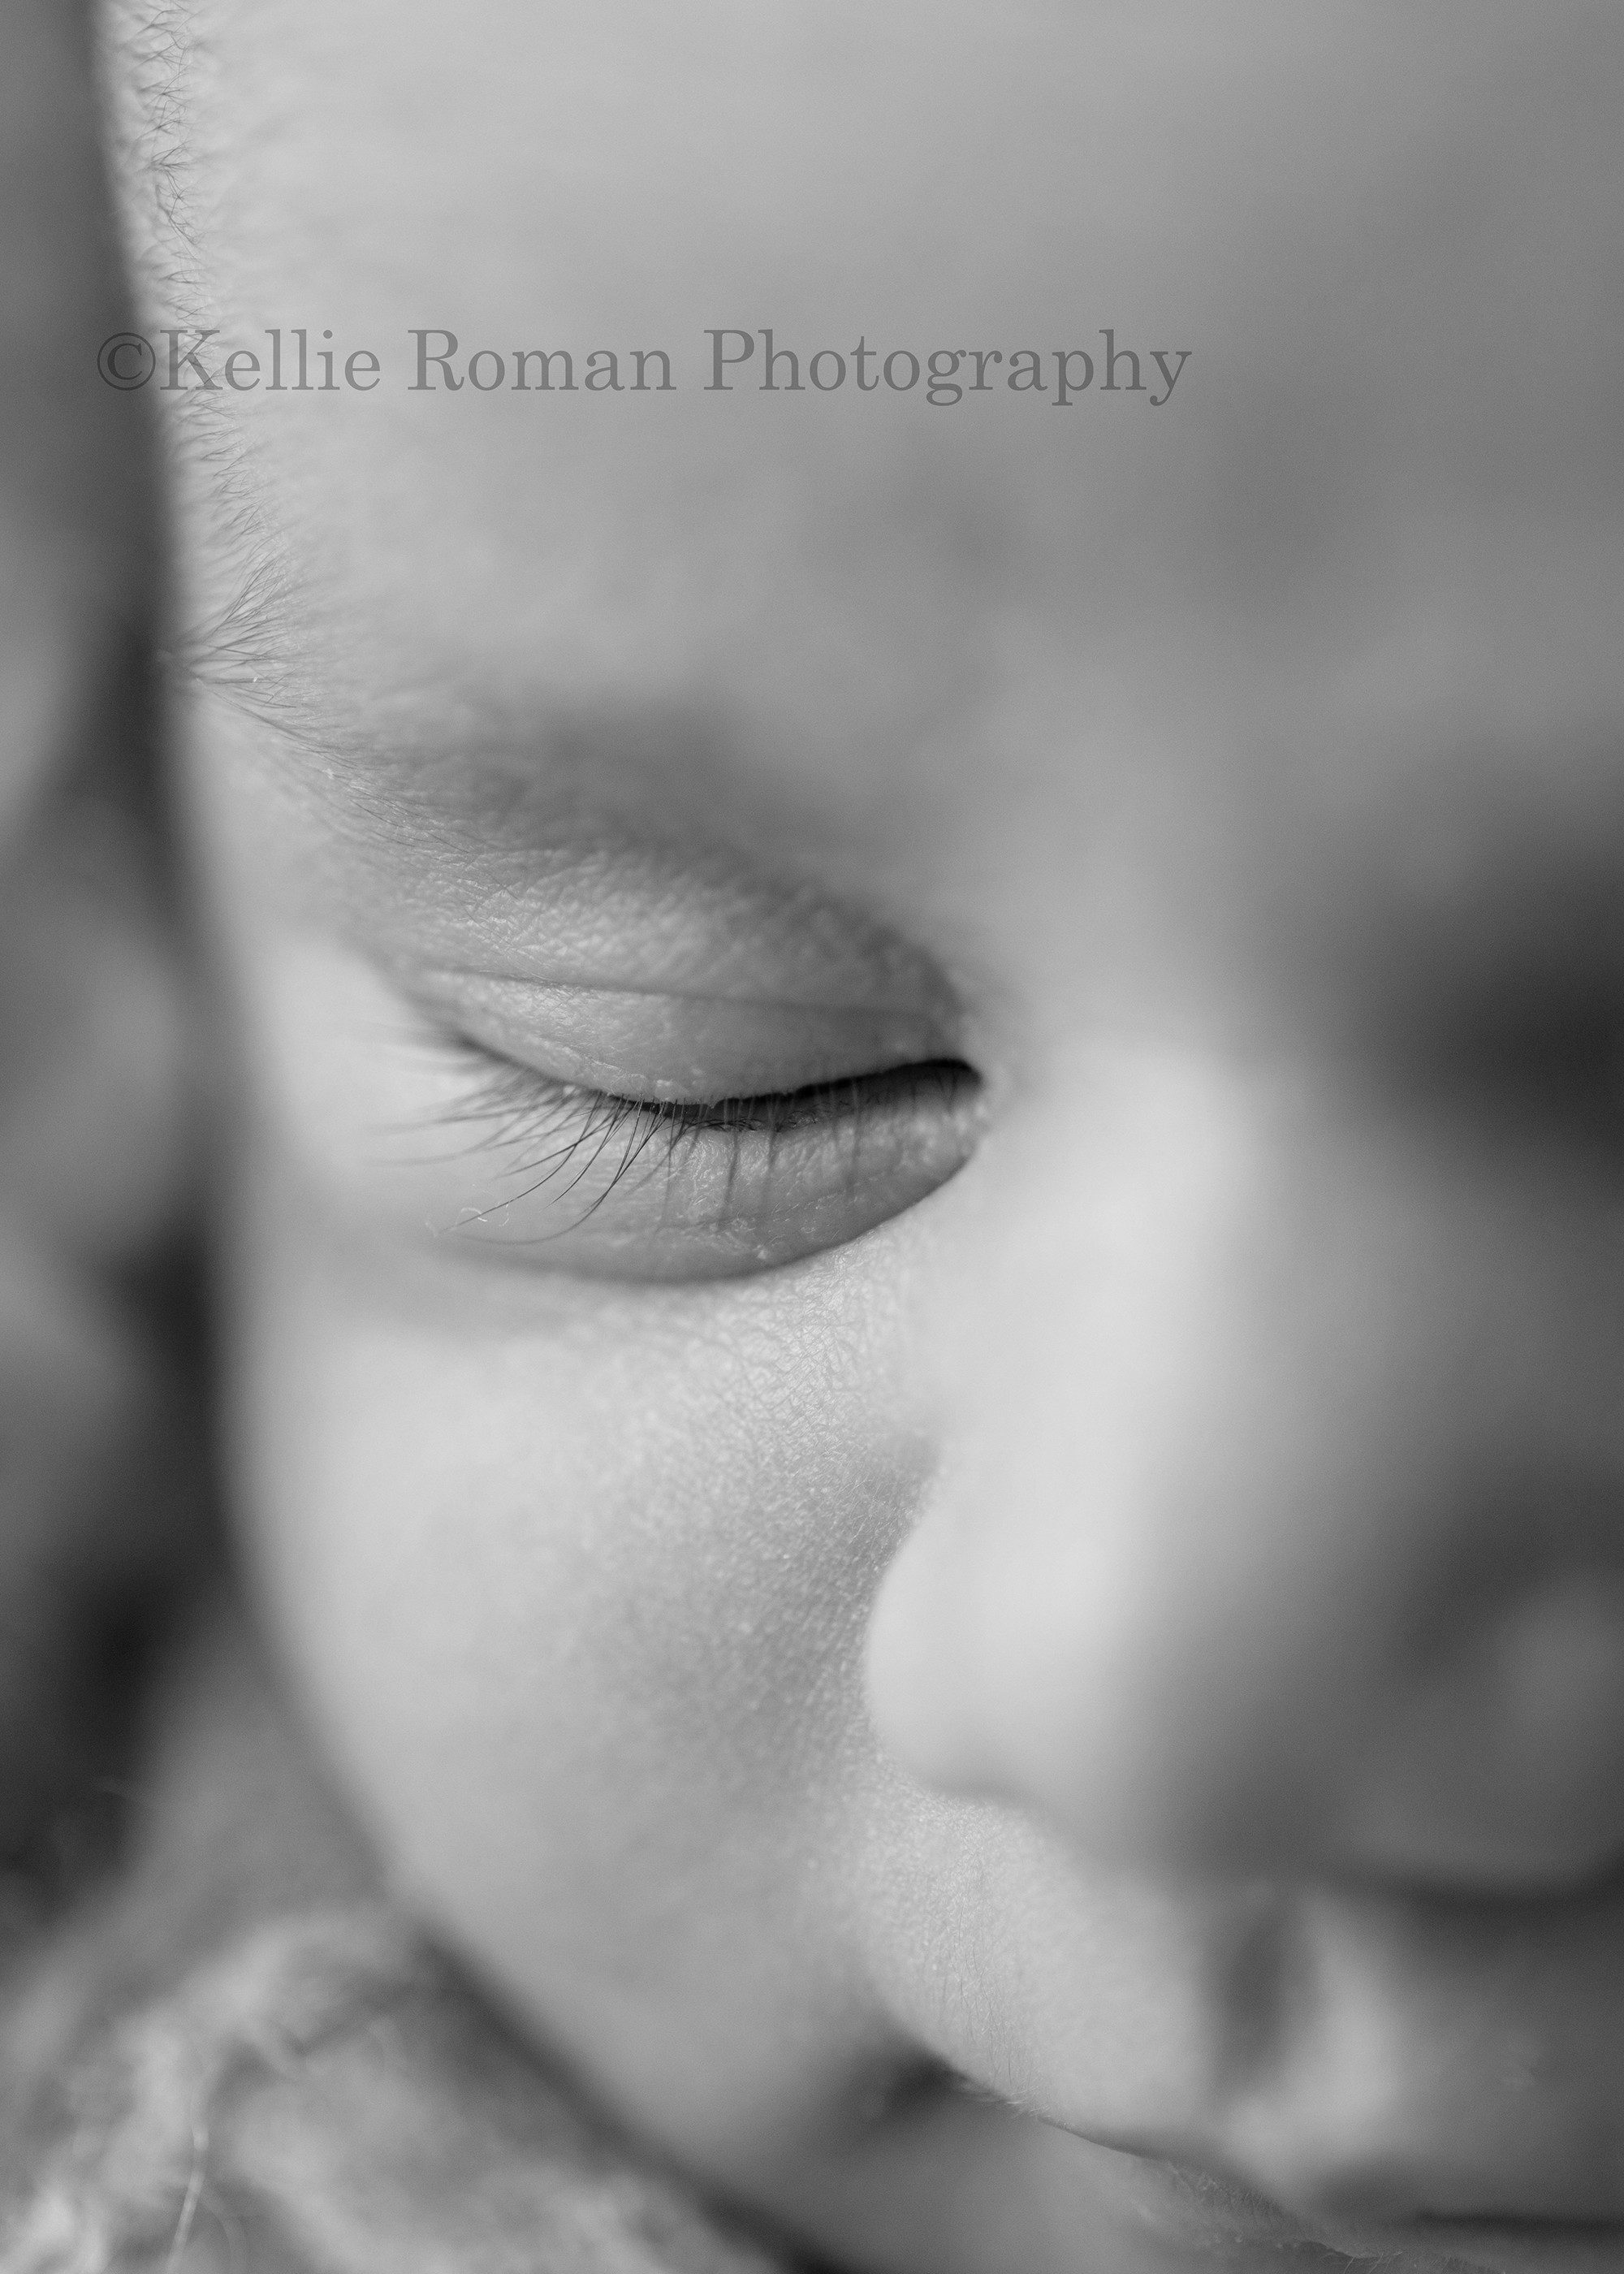 milwaukee newborn photographer. A close up shot of a baby girl in a Milwaukee photo studio located in greendale. The image is black and white and is a close up of the babies eye and lashes.